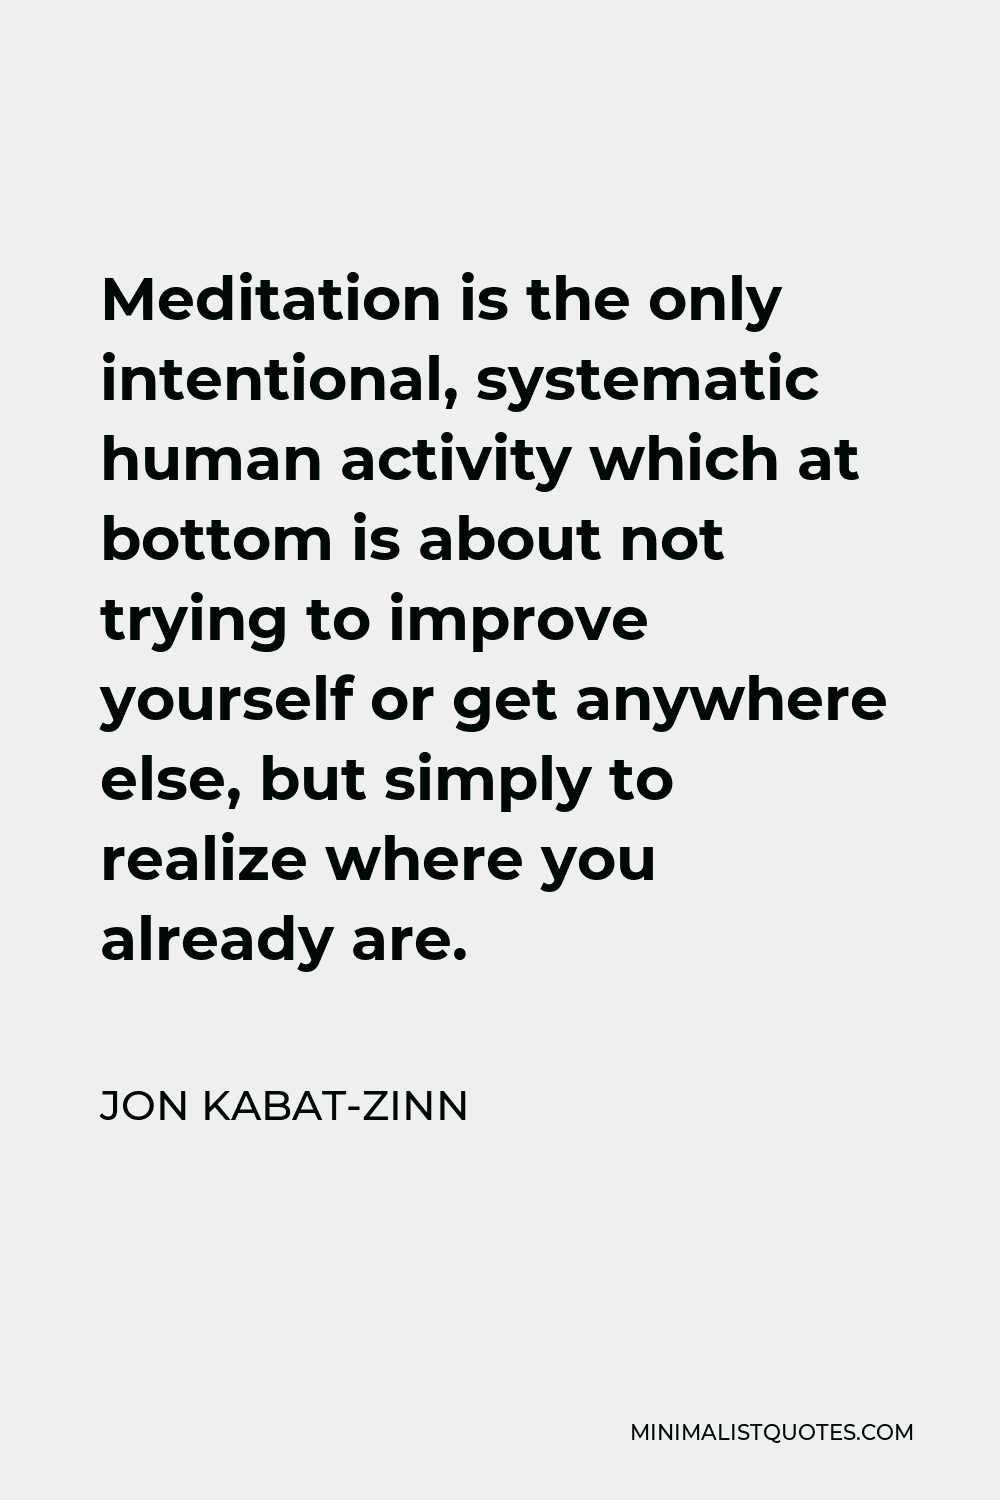 Jon Kabat-Zinn Quote - Meditation is the only intentional, systematic human activity which at bottom is about not trying to improve yourself or get anywhere else, but simply to realize where you already are.